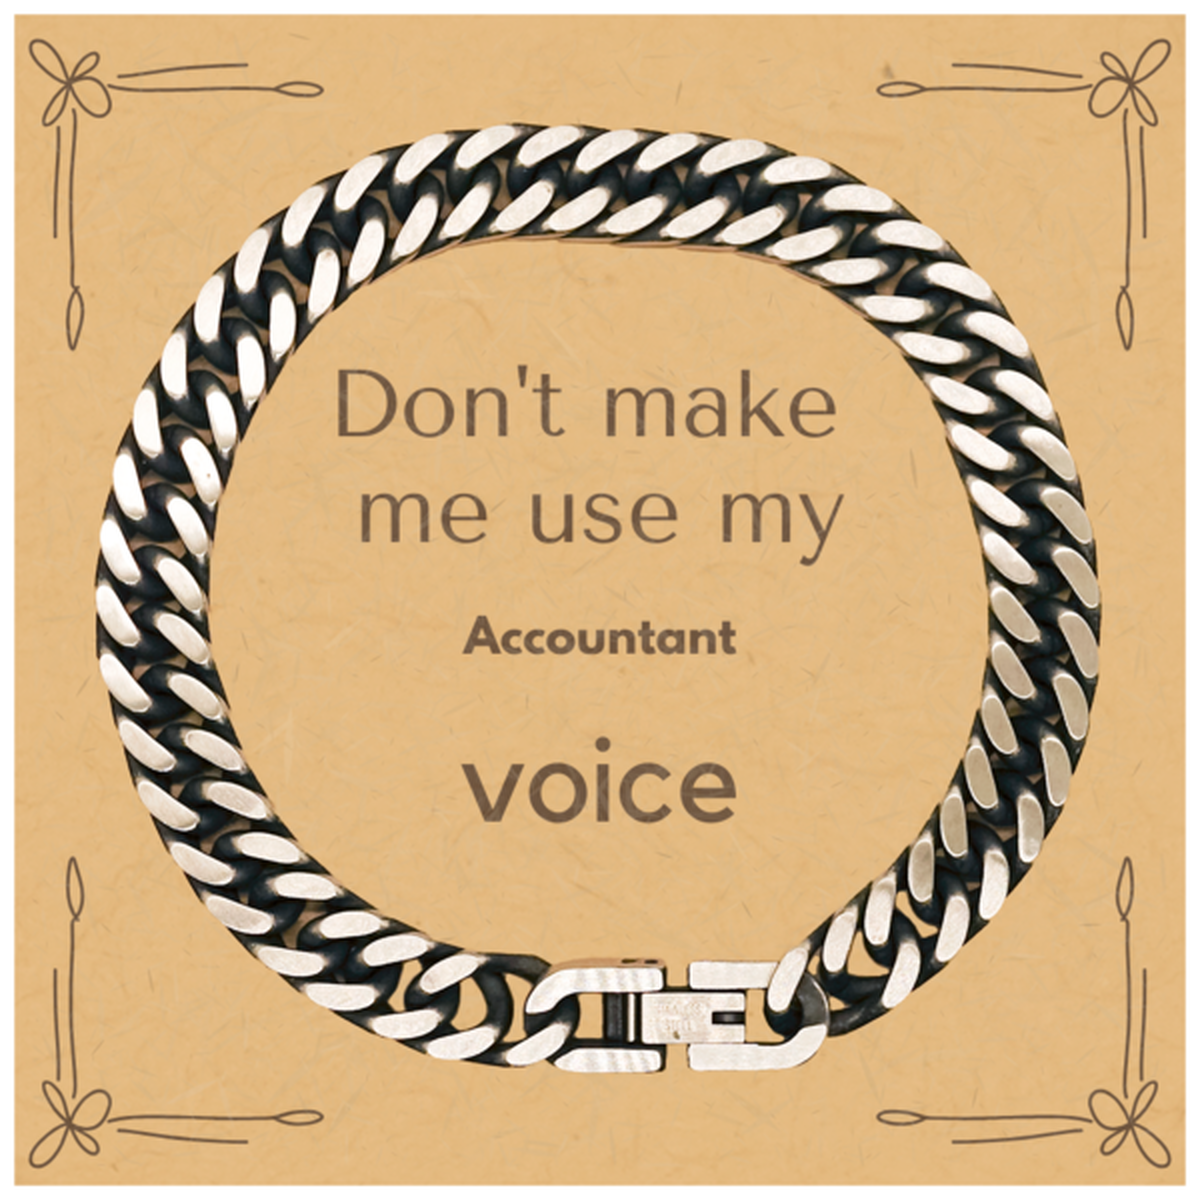 Don't make me use my Accountant voice, Sarcasm Accountant Card Gifts, Christmas Accountant Cuban Link Chain Bracelet Birthday Unique Gifts For Accountant Coworkers, Men, Women, Colleague, Friends